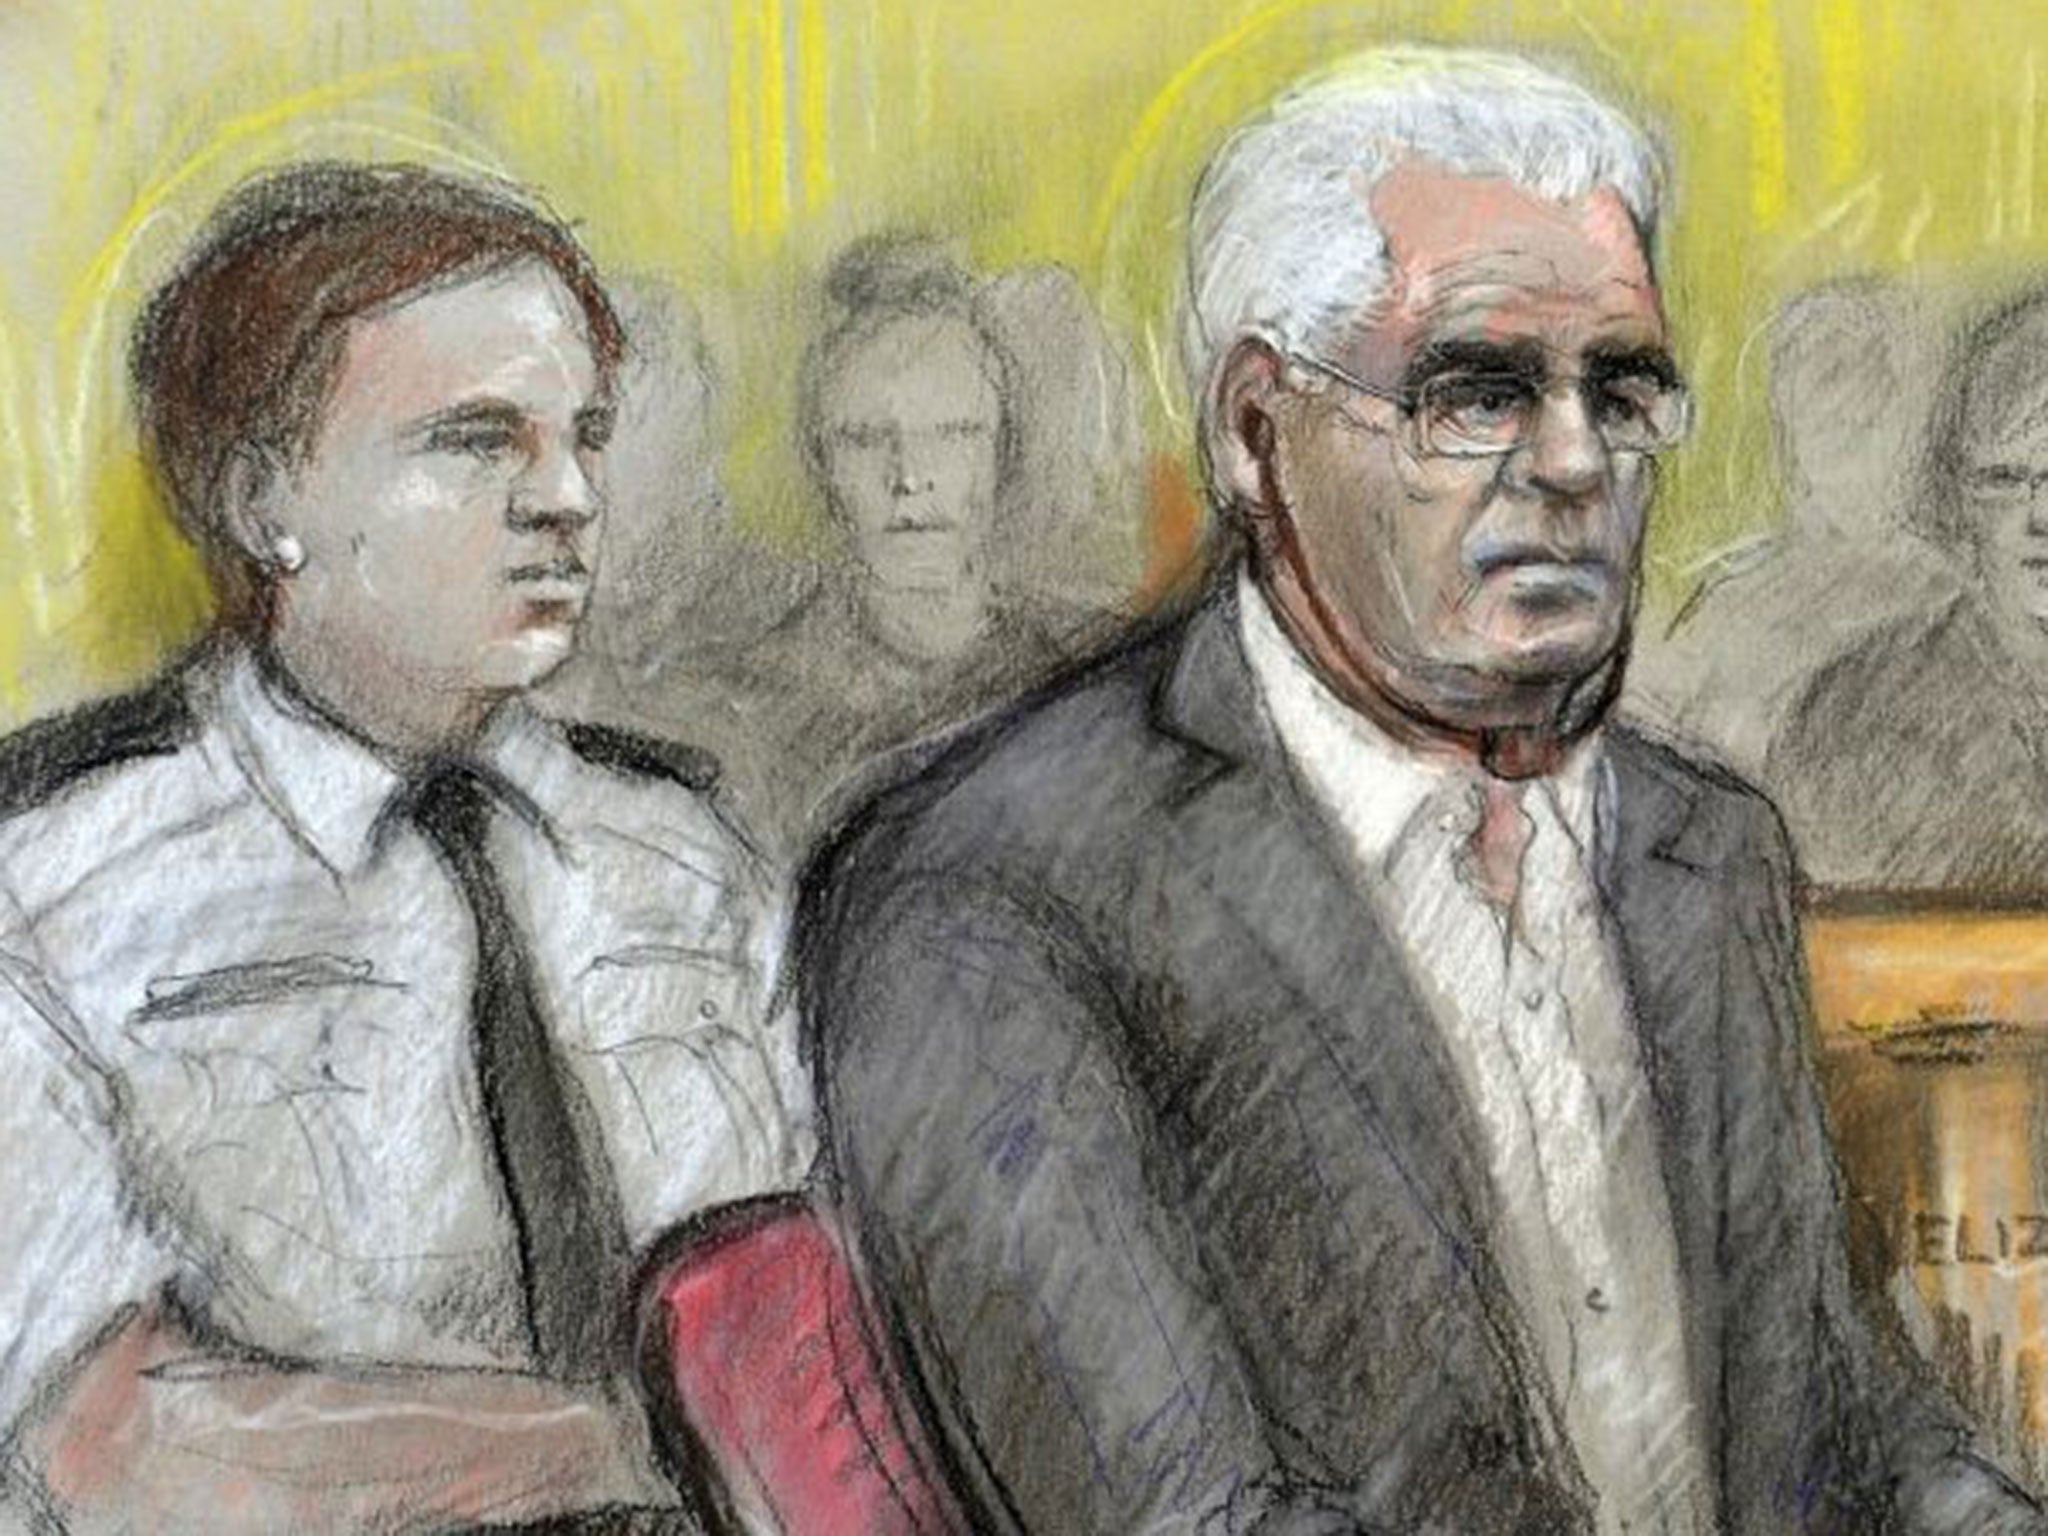 Prosecutors said that max Clifford 'knows how to manipulate, lie and get what he wants'